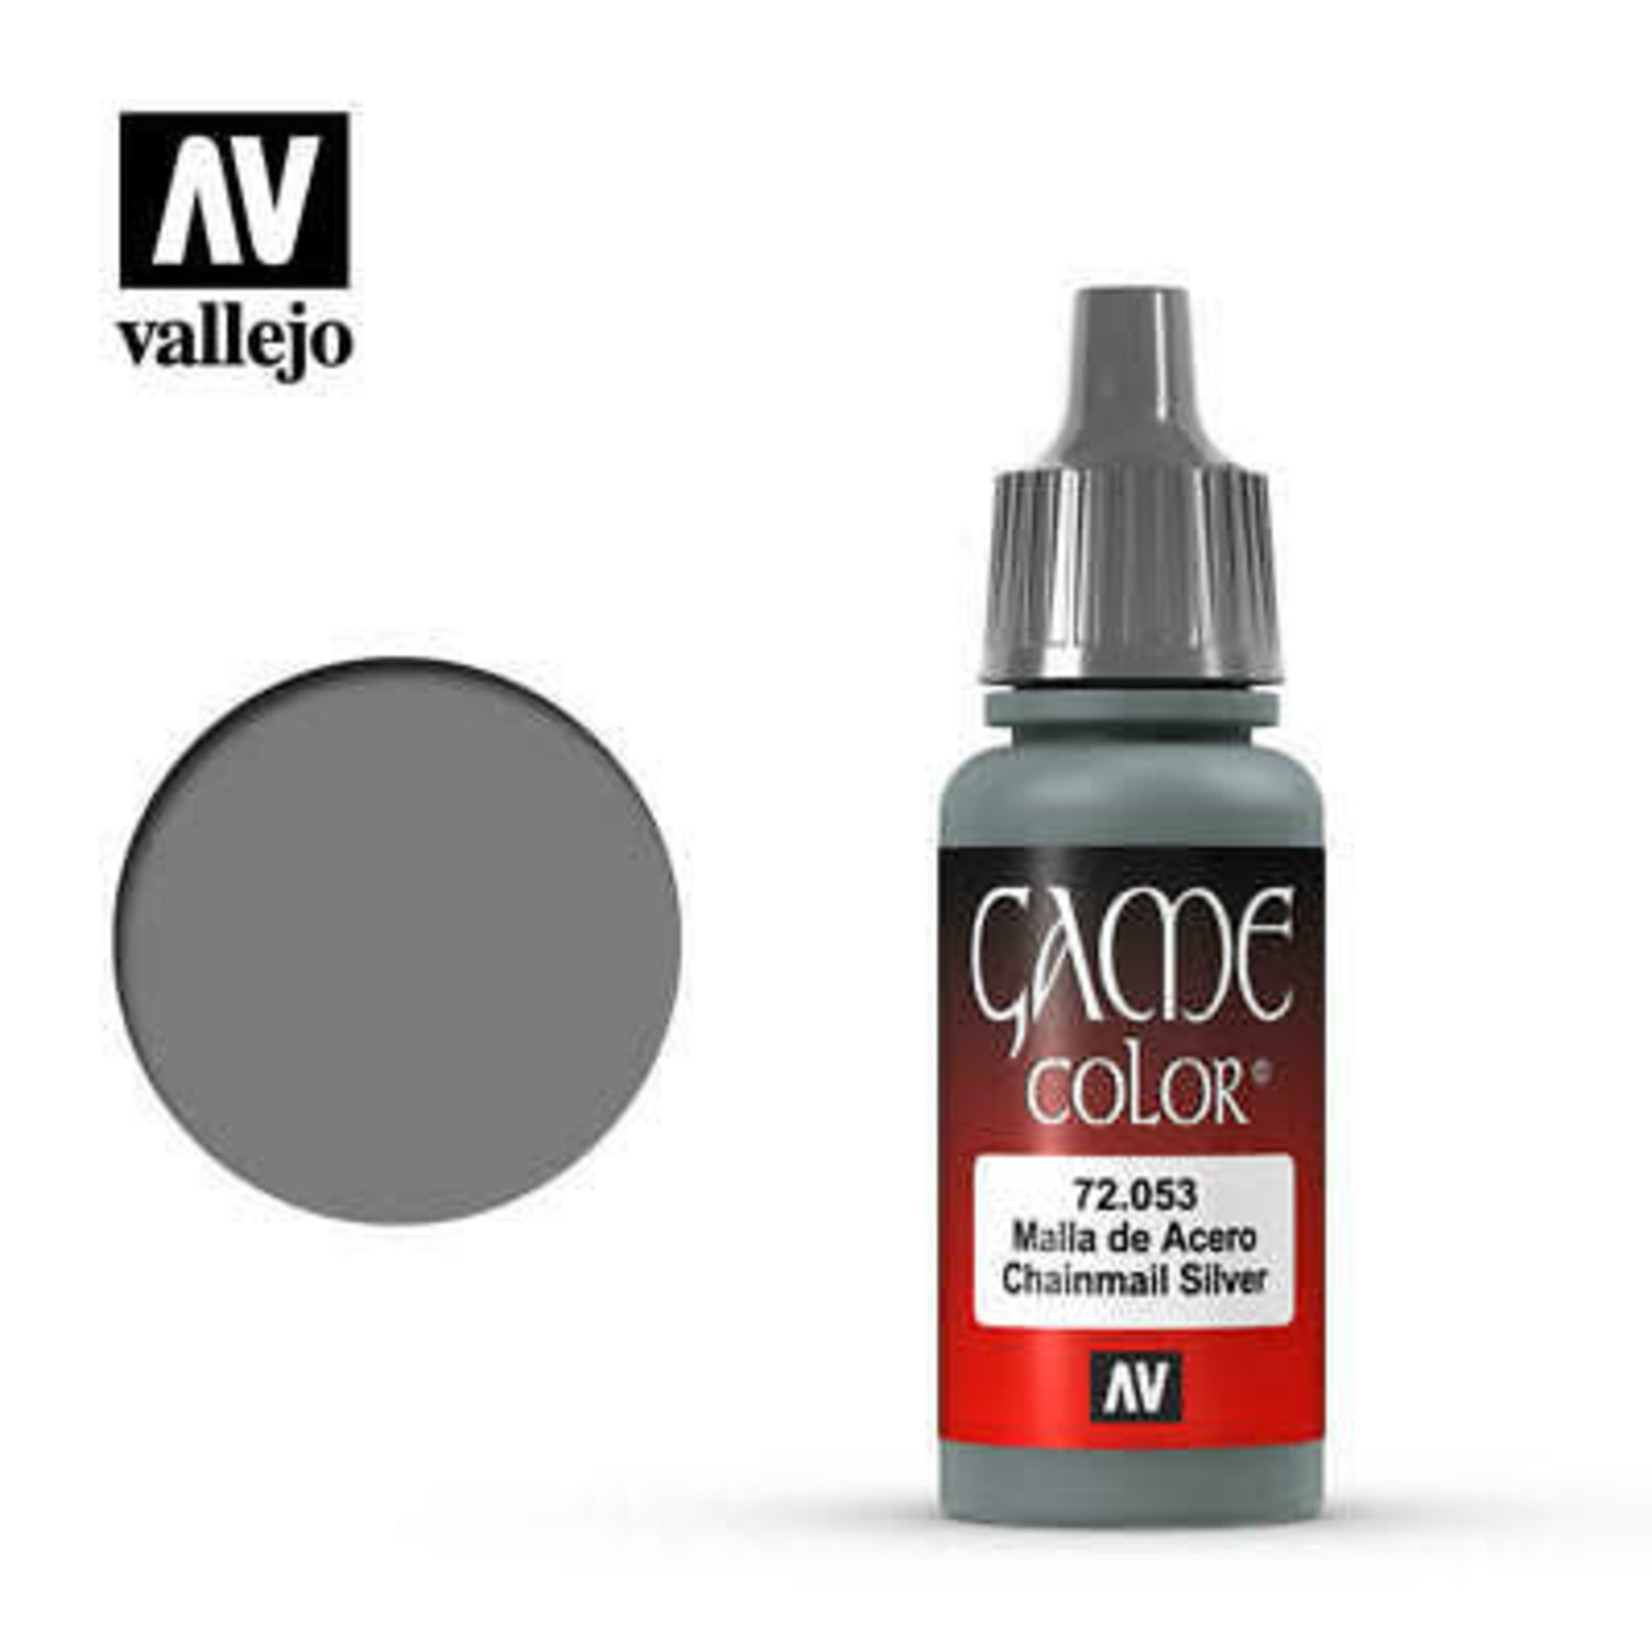 Acrylicos Vallejo VGC Chainmail Silver